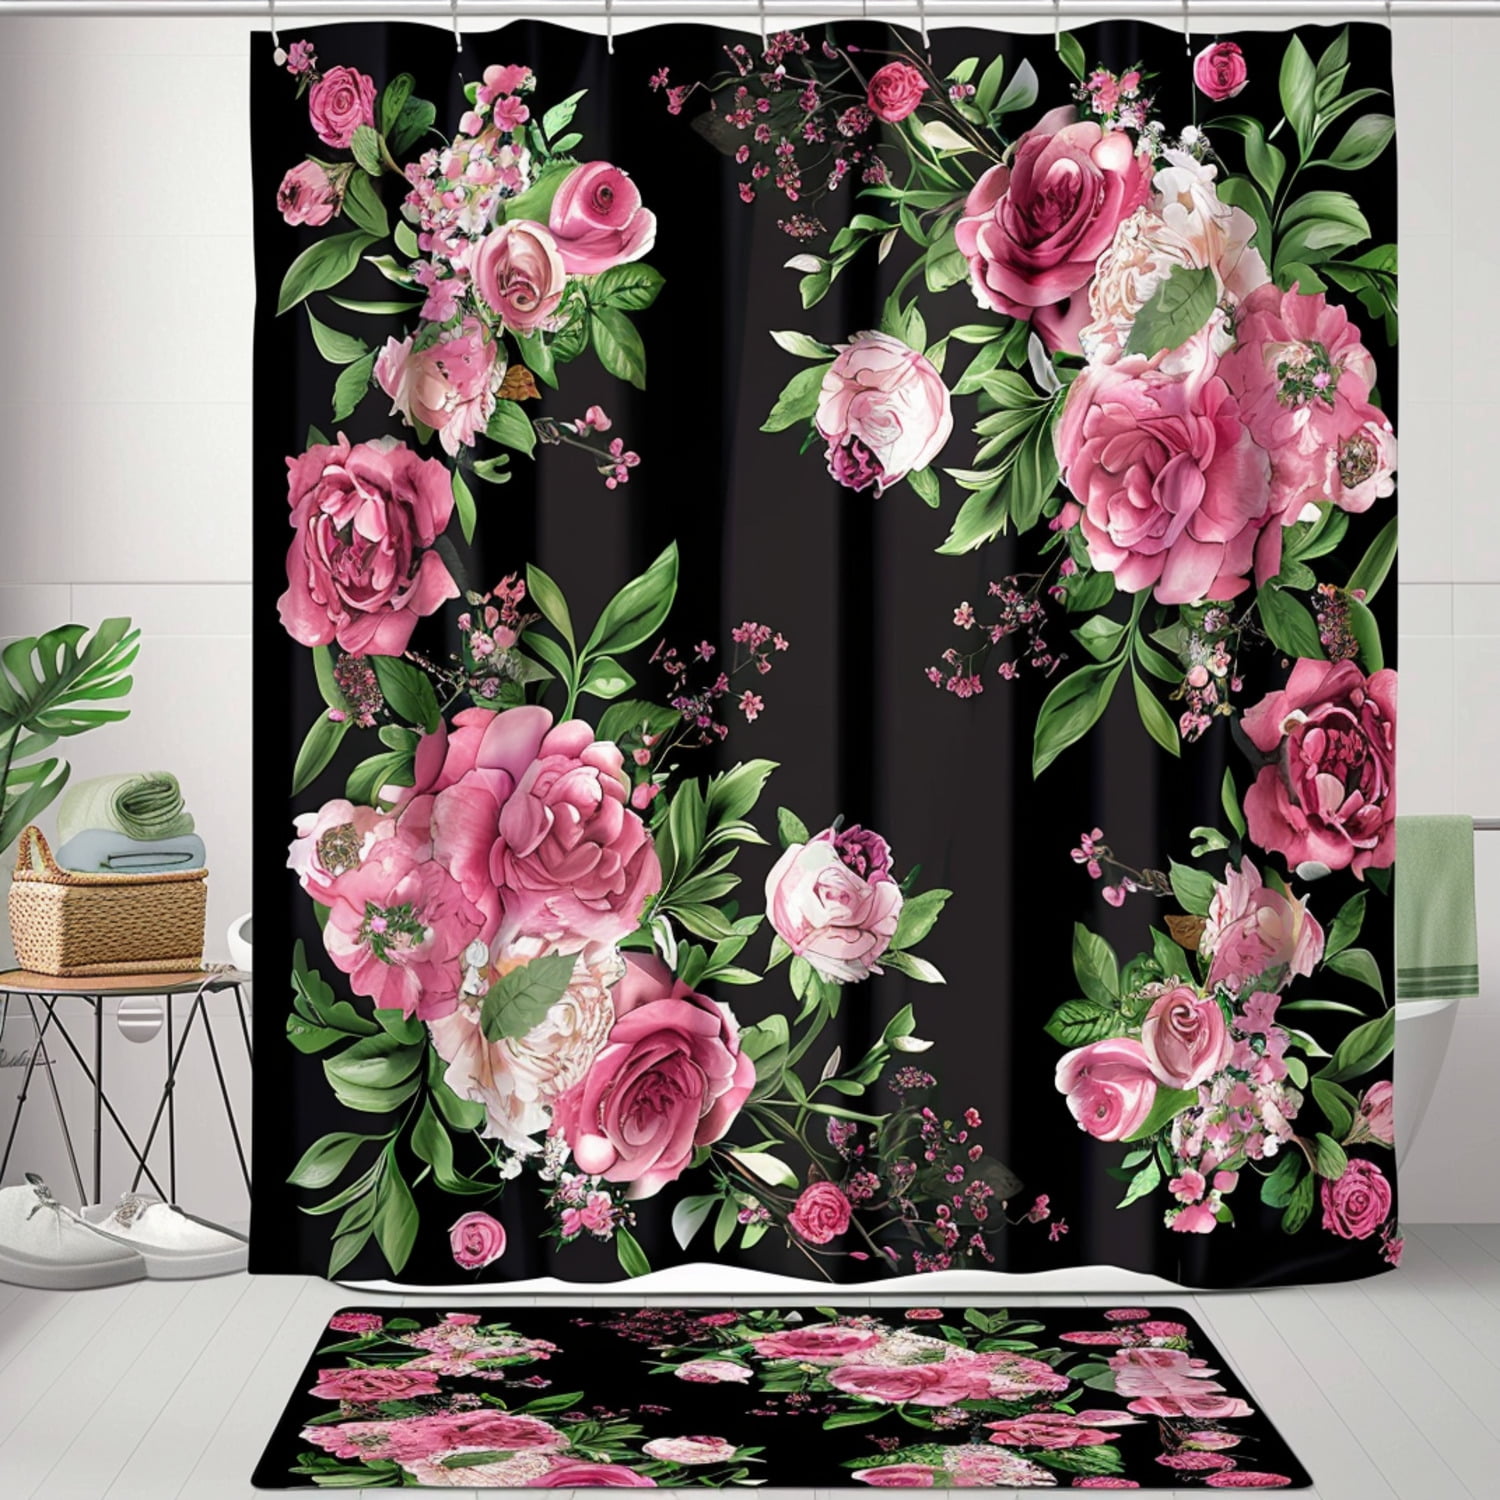 Black And Pink Floral Bathroom Accessories Set With Roses And